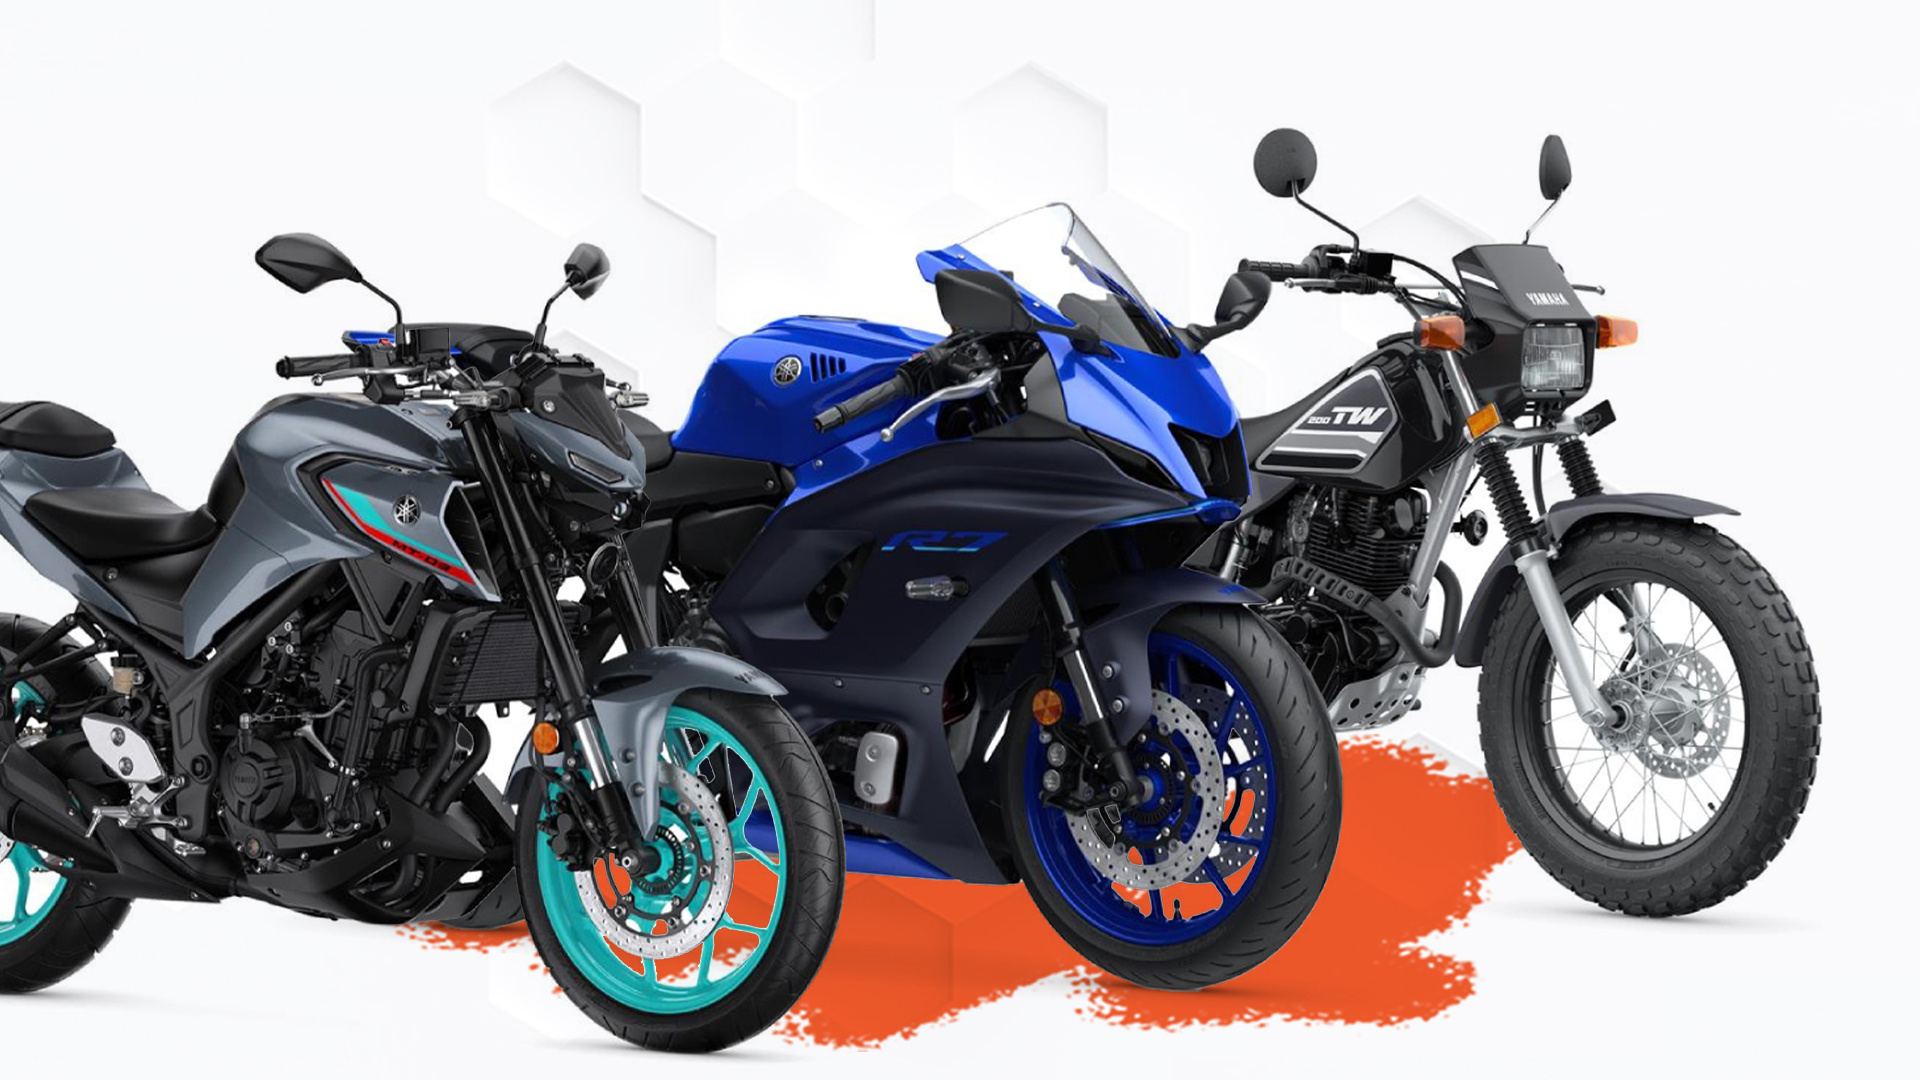 The 2023 Yamaha Motorcycle Lineup + Our Take on Each Model - webBikeWorld